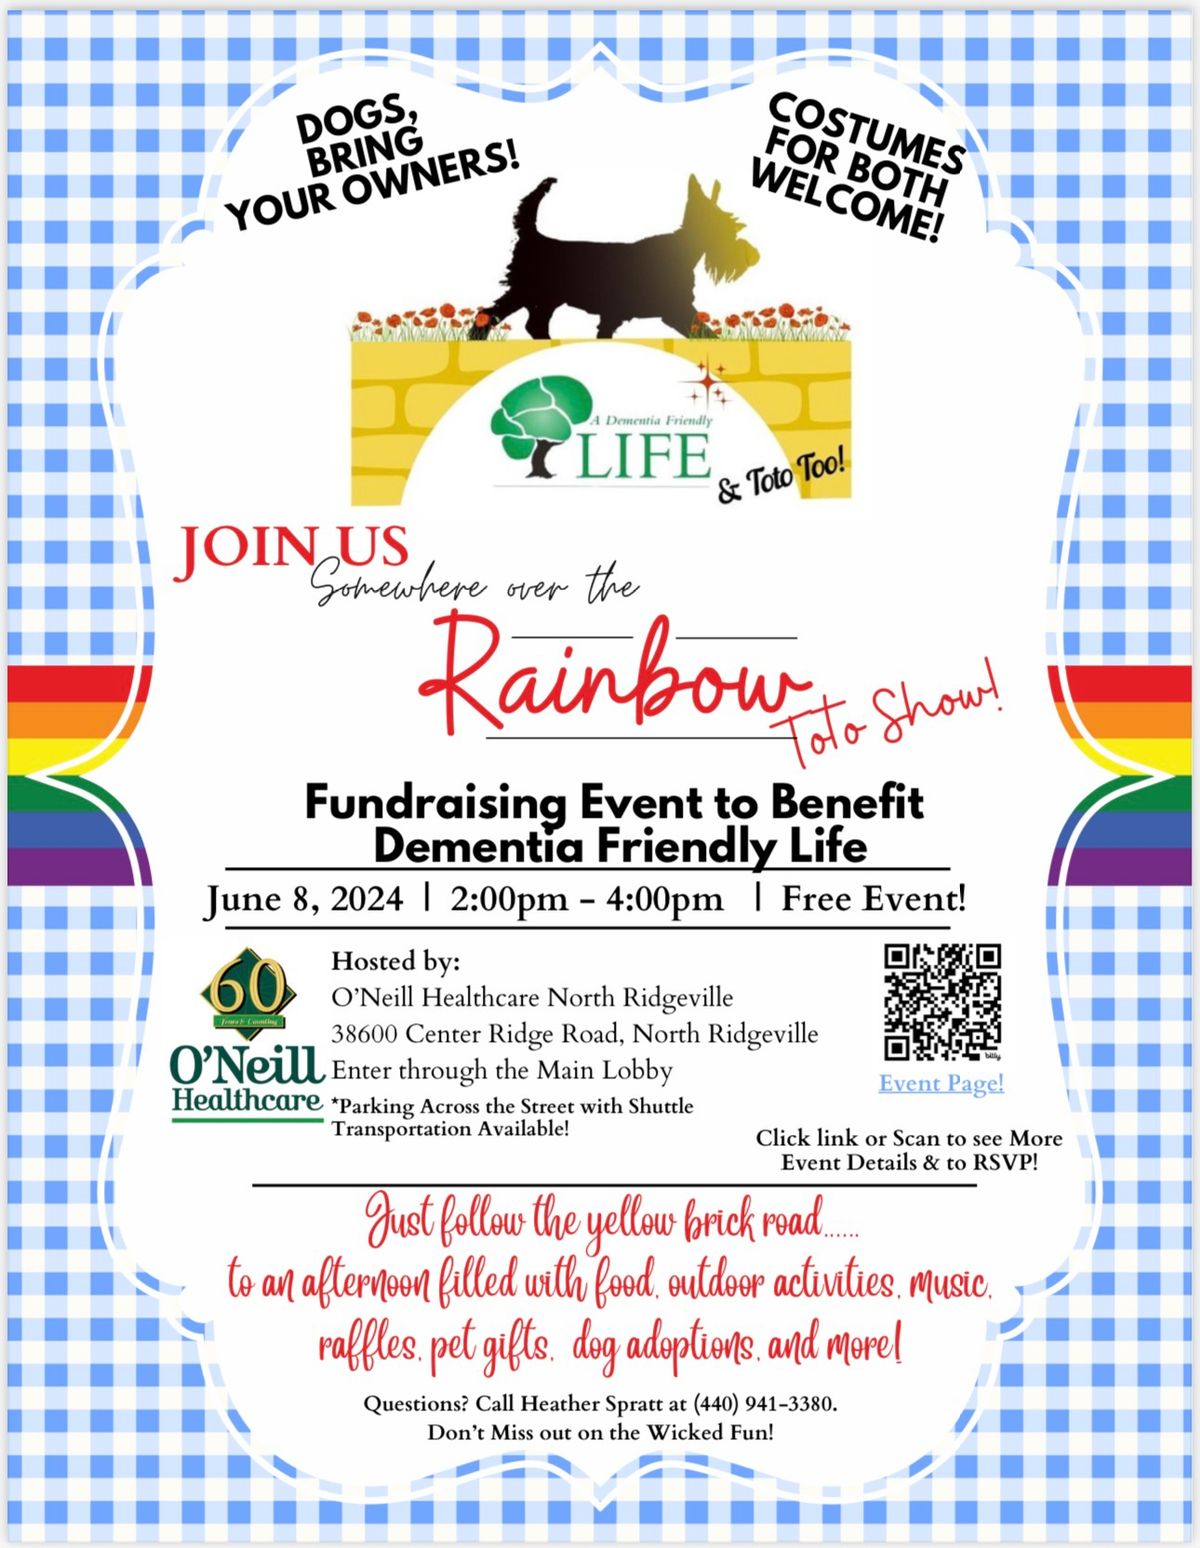 Somewhere Over the Rainbow: ToTo Show (Fundraising event for Dementia Friendly Life)